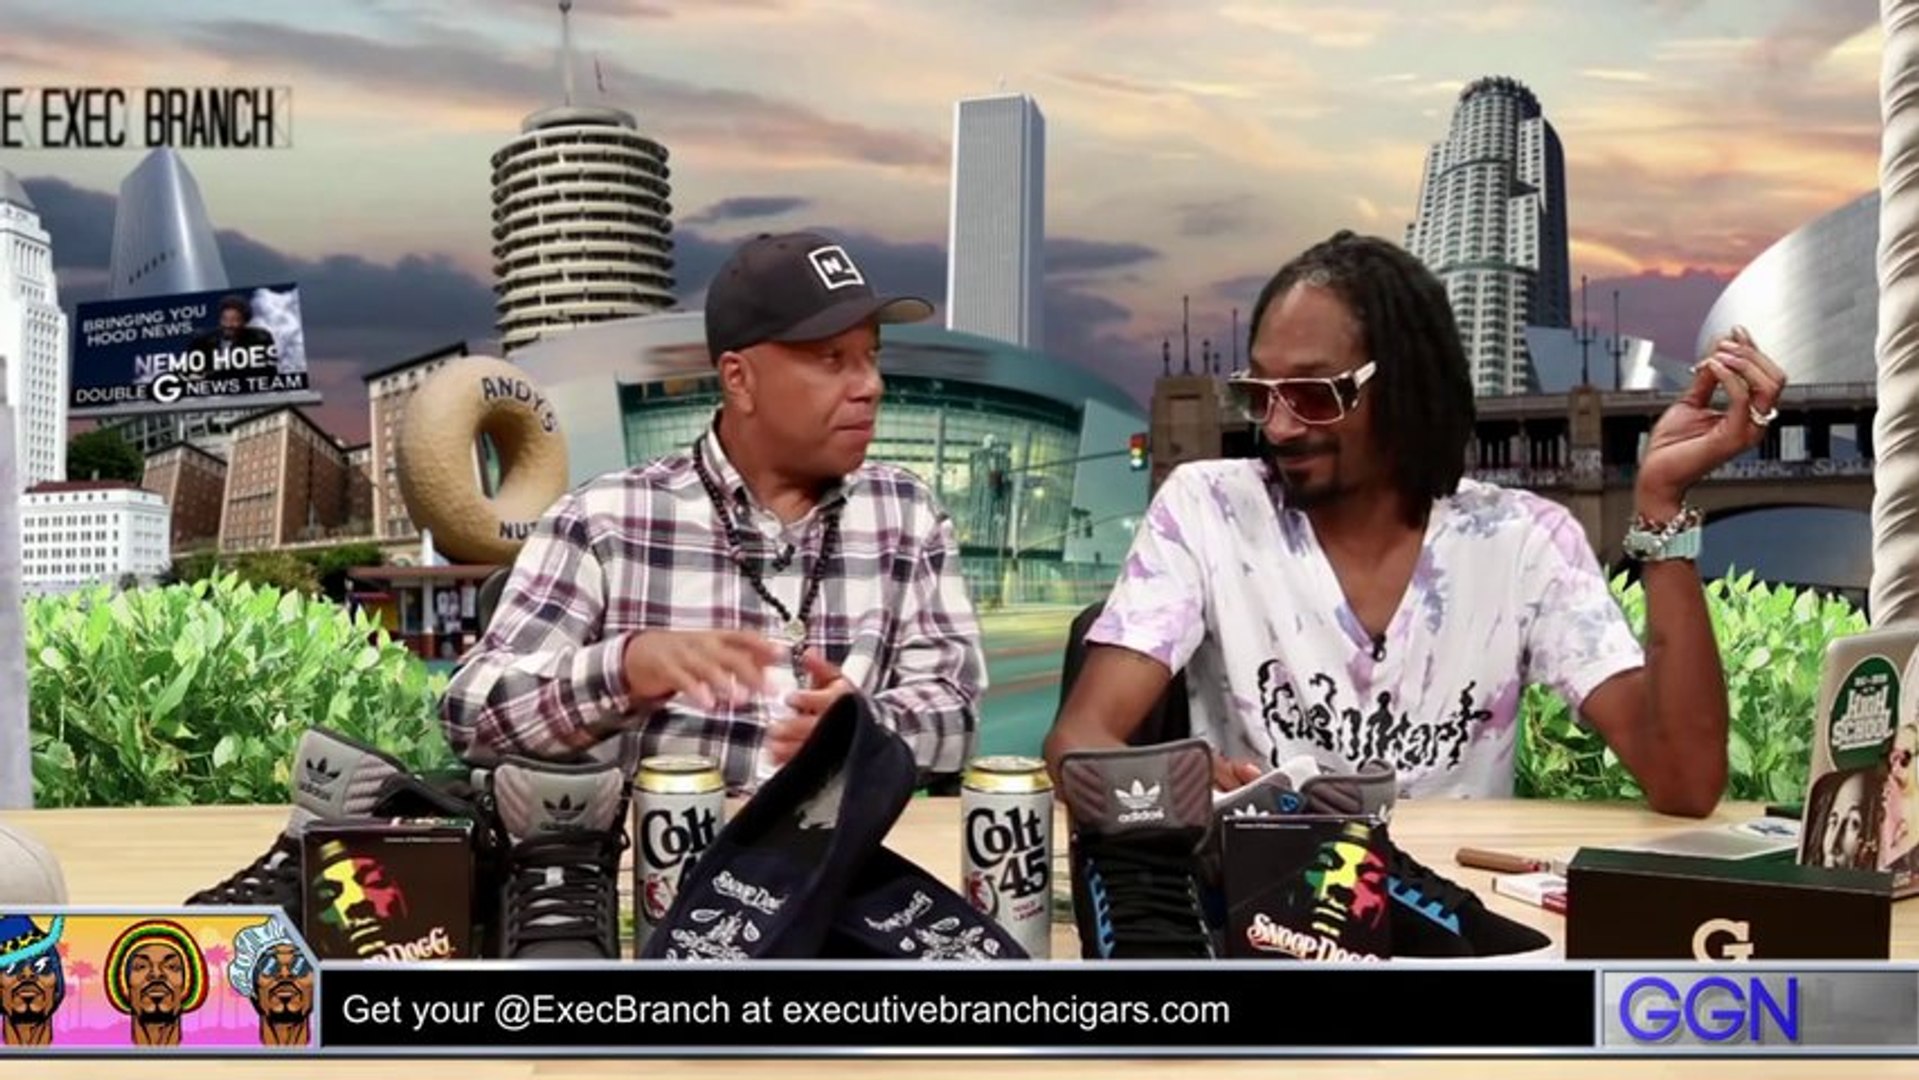 Snoop Dogg Presents "GGN - Double G News Network" Ep.12 Se.6 starring  Russell Simmons & Nemo Hoes - Vidéo Dailymotion